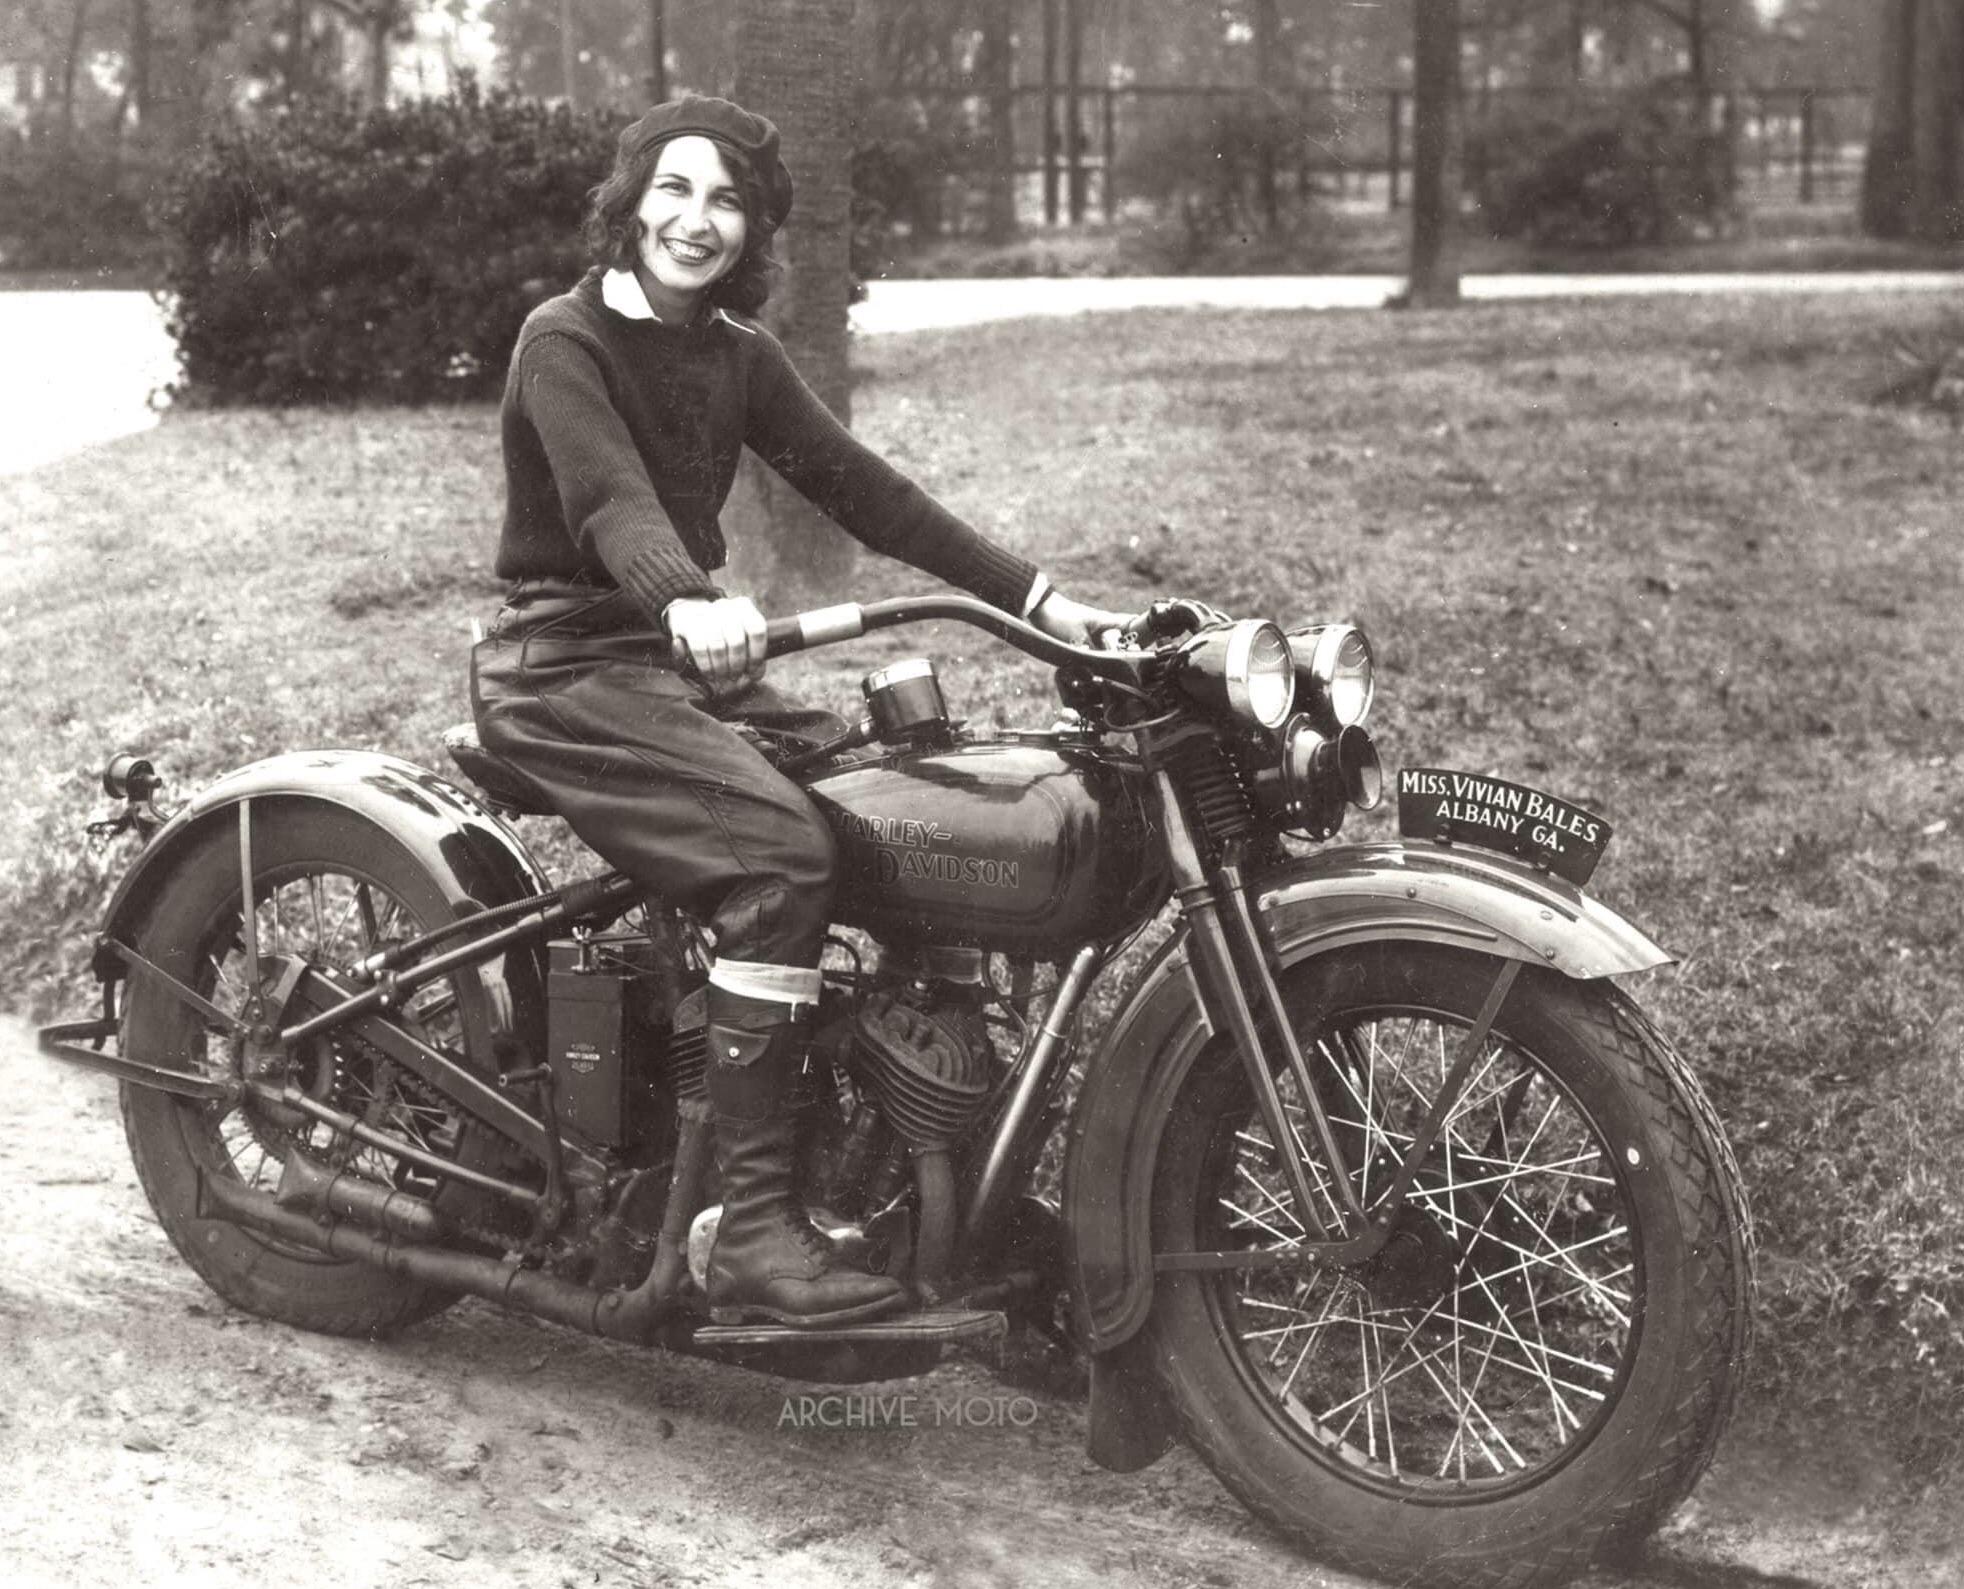 Vivian Bales, a stunt motorcycle rider from the 1920s.jpeg